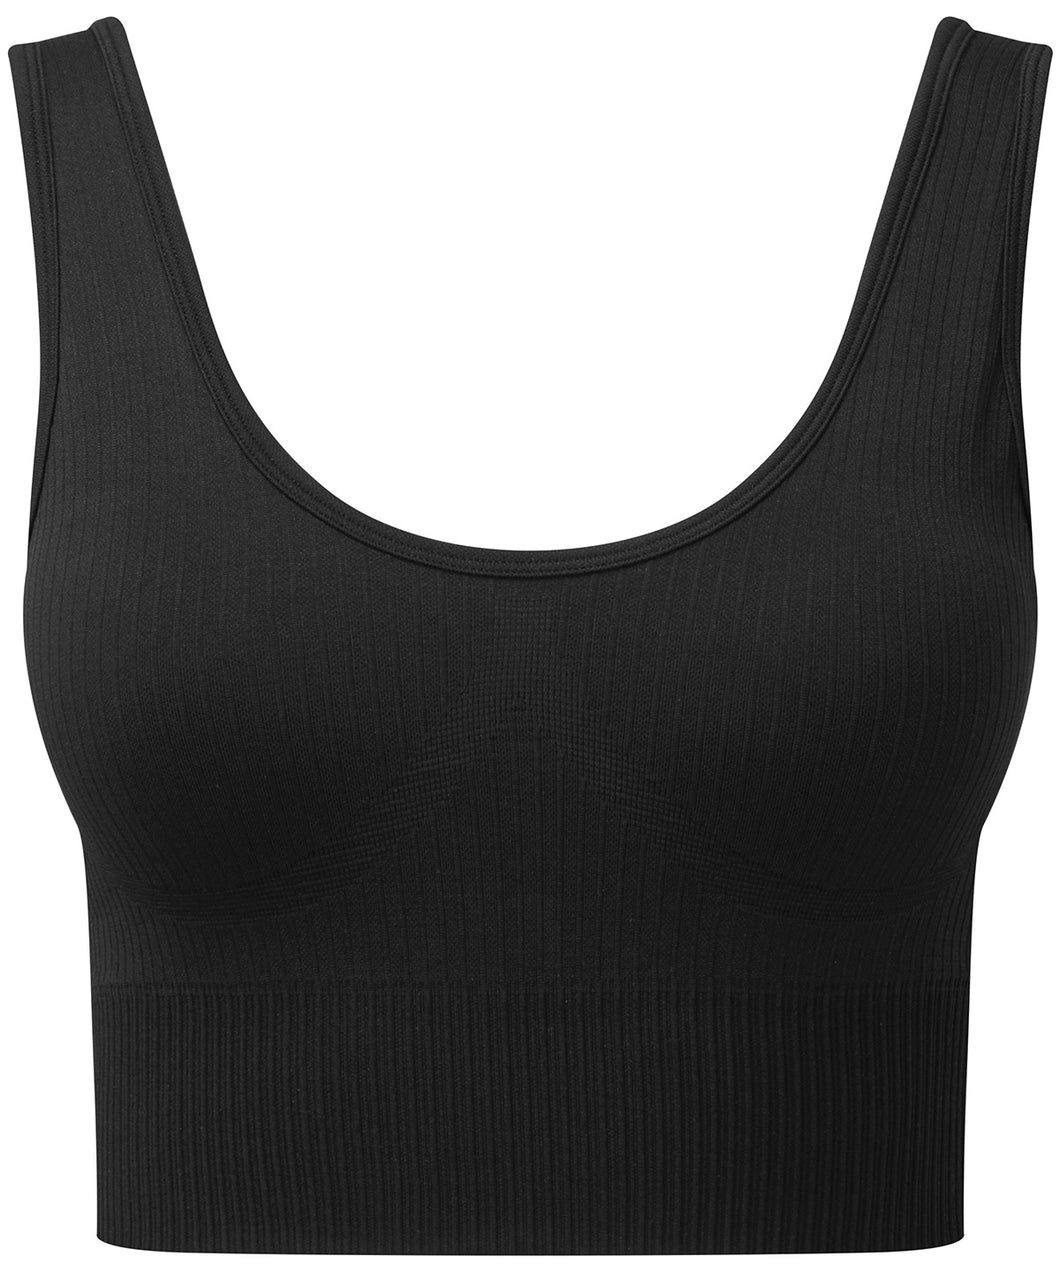 Bra-Women's ribbed seamless 3D fit multi-sport bra available in 6 colours